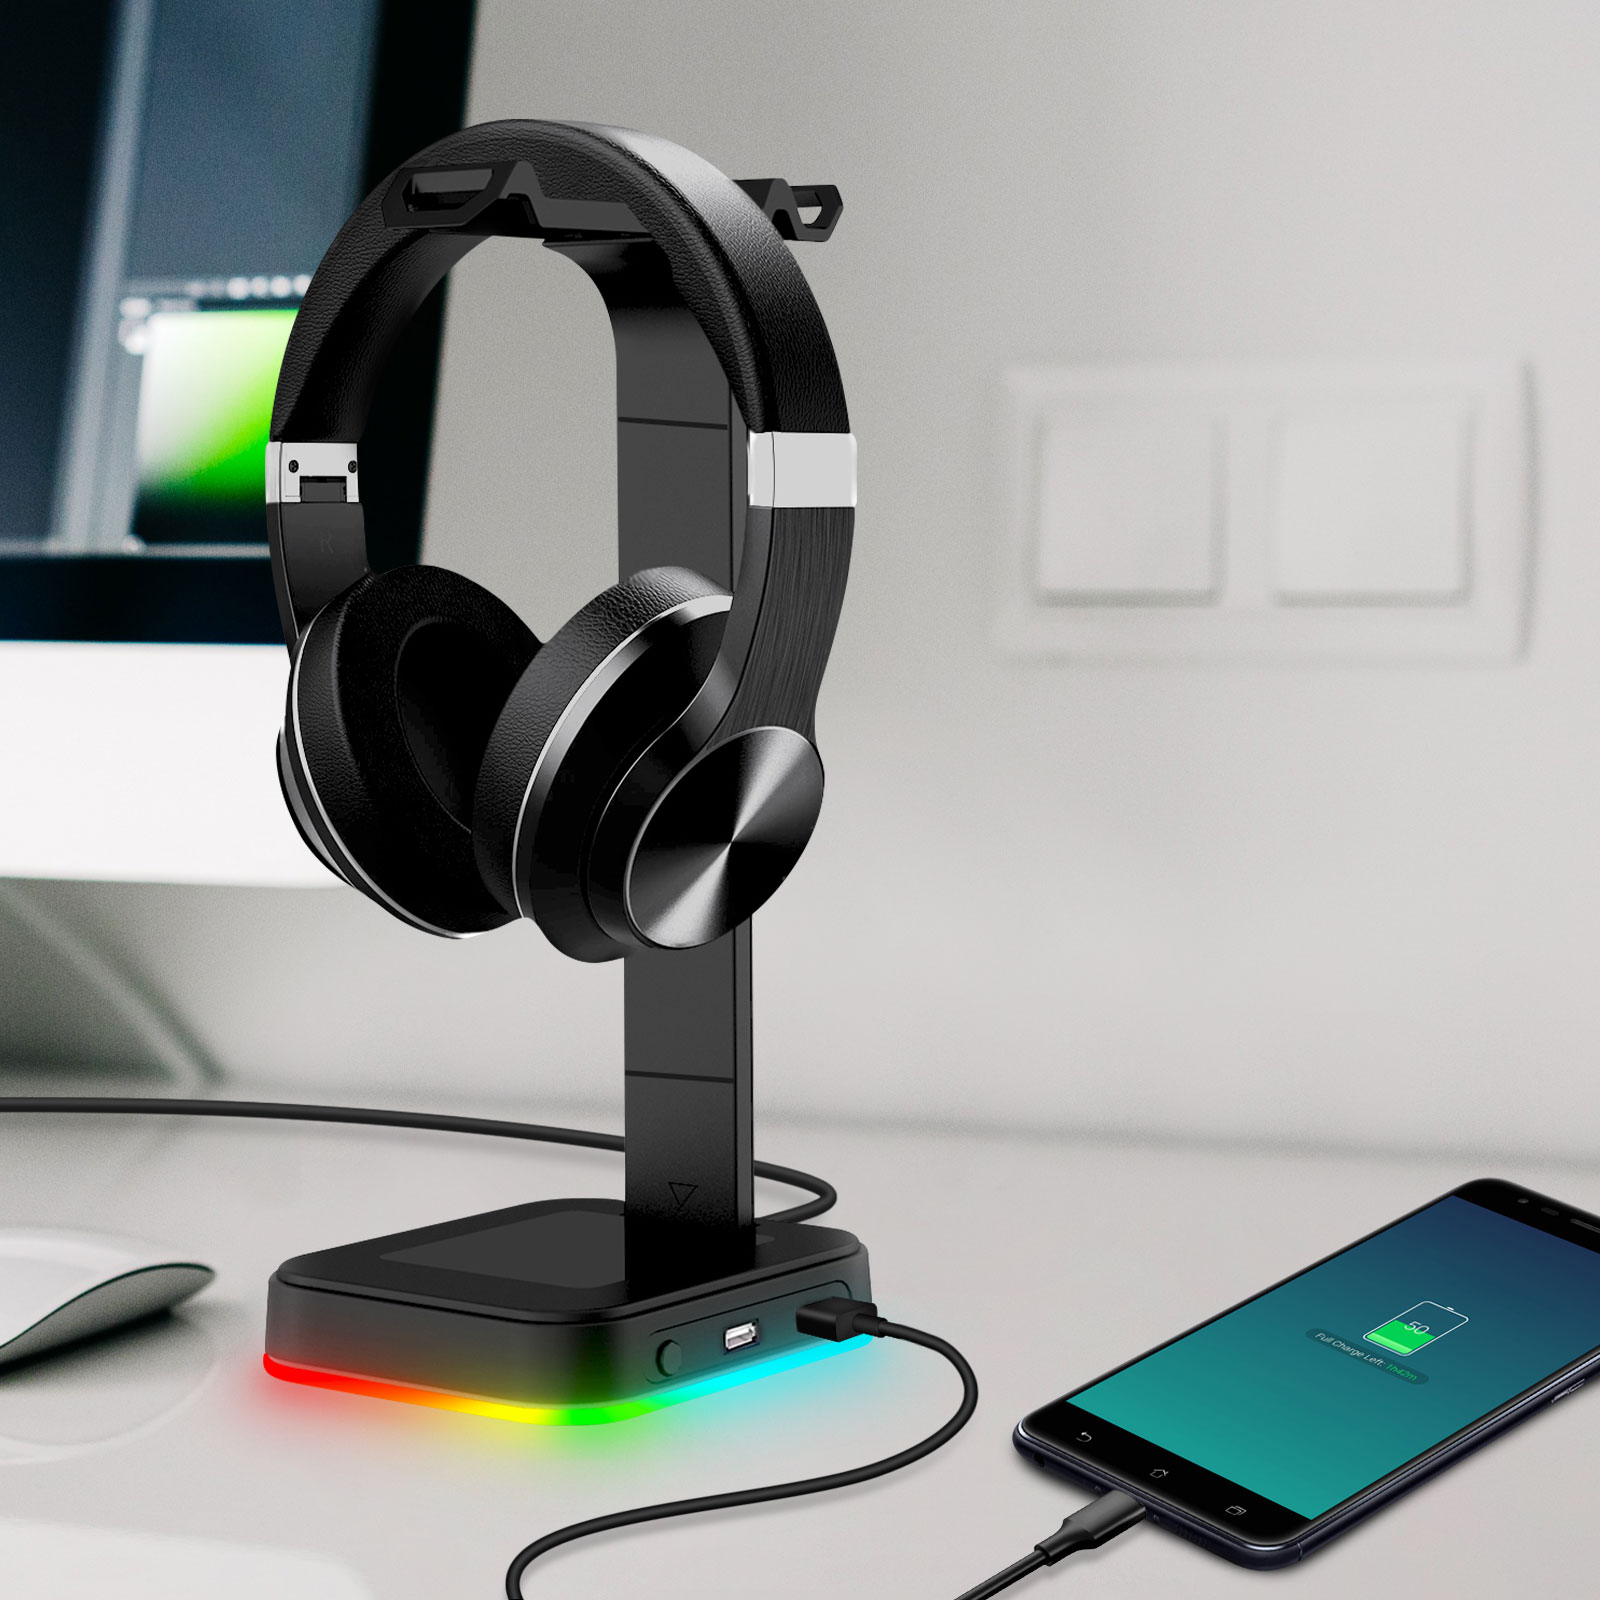 RGB Headphone Stand with USB Ports - Gaming Desk Accessory